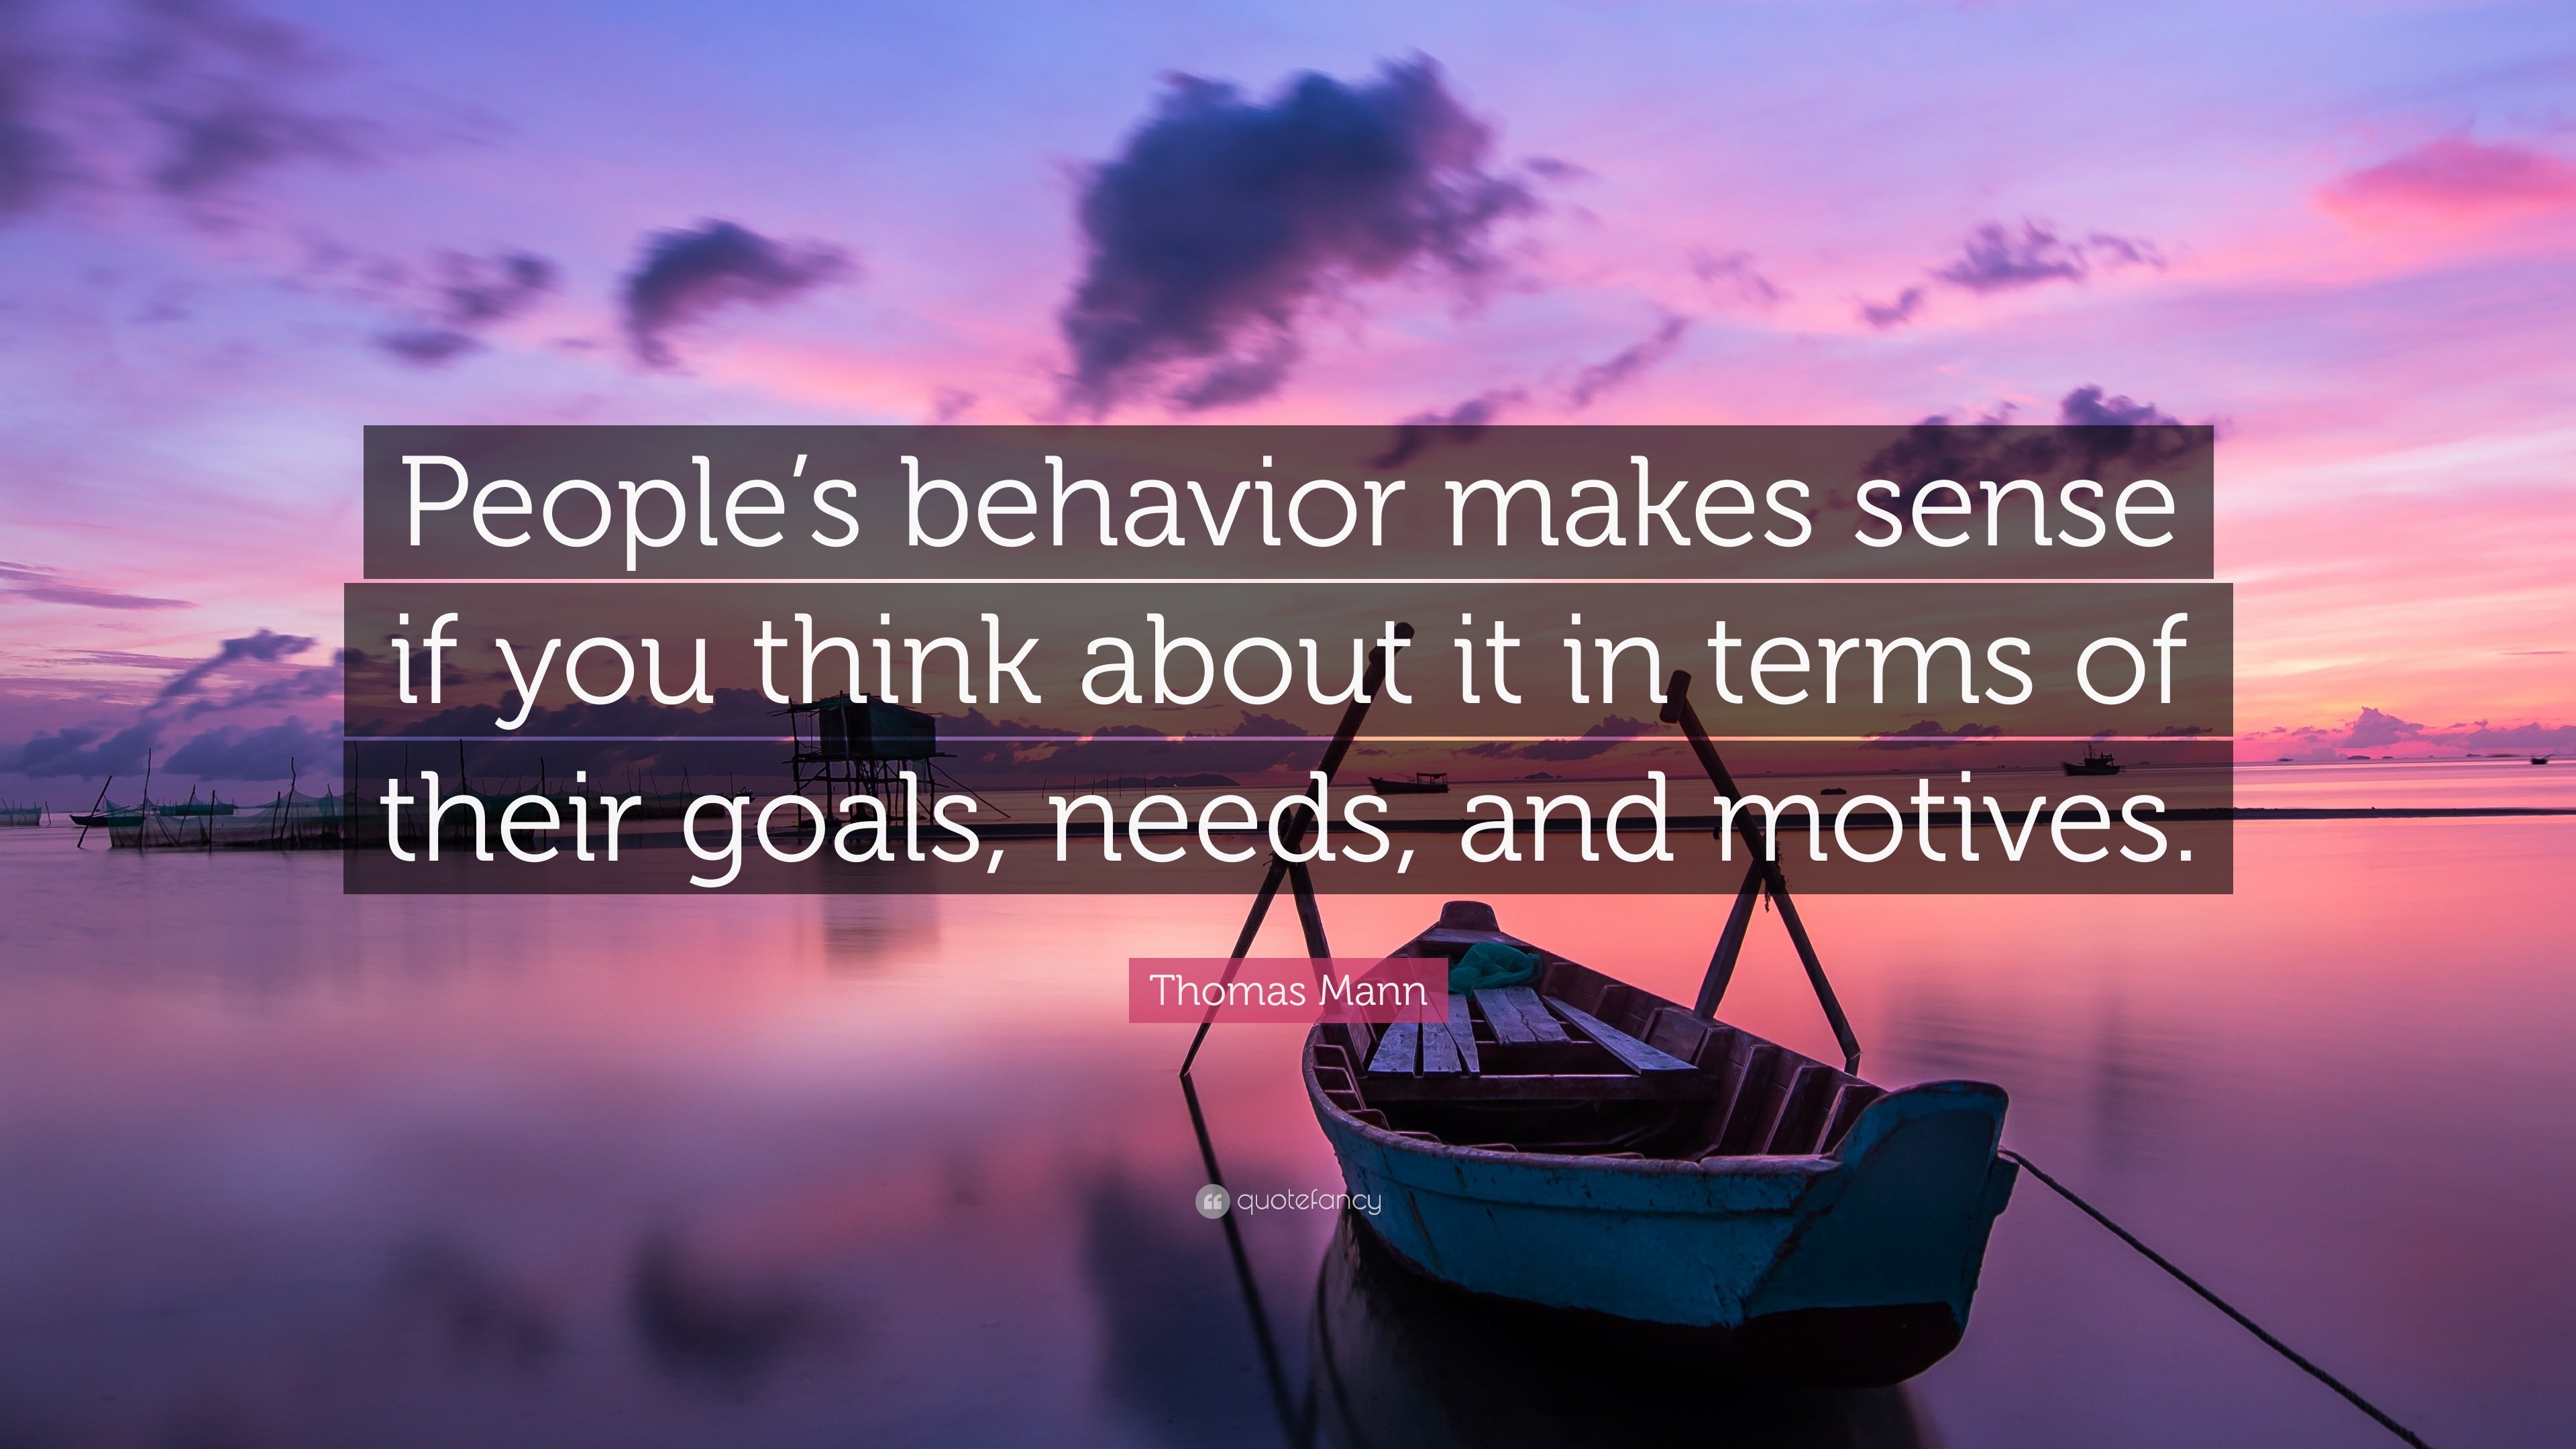 Thomas Mann Quote: “People’s behavior makes sense if you think about it